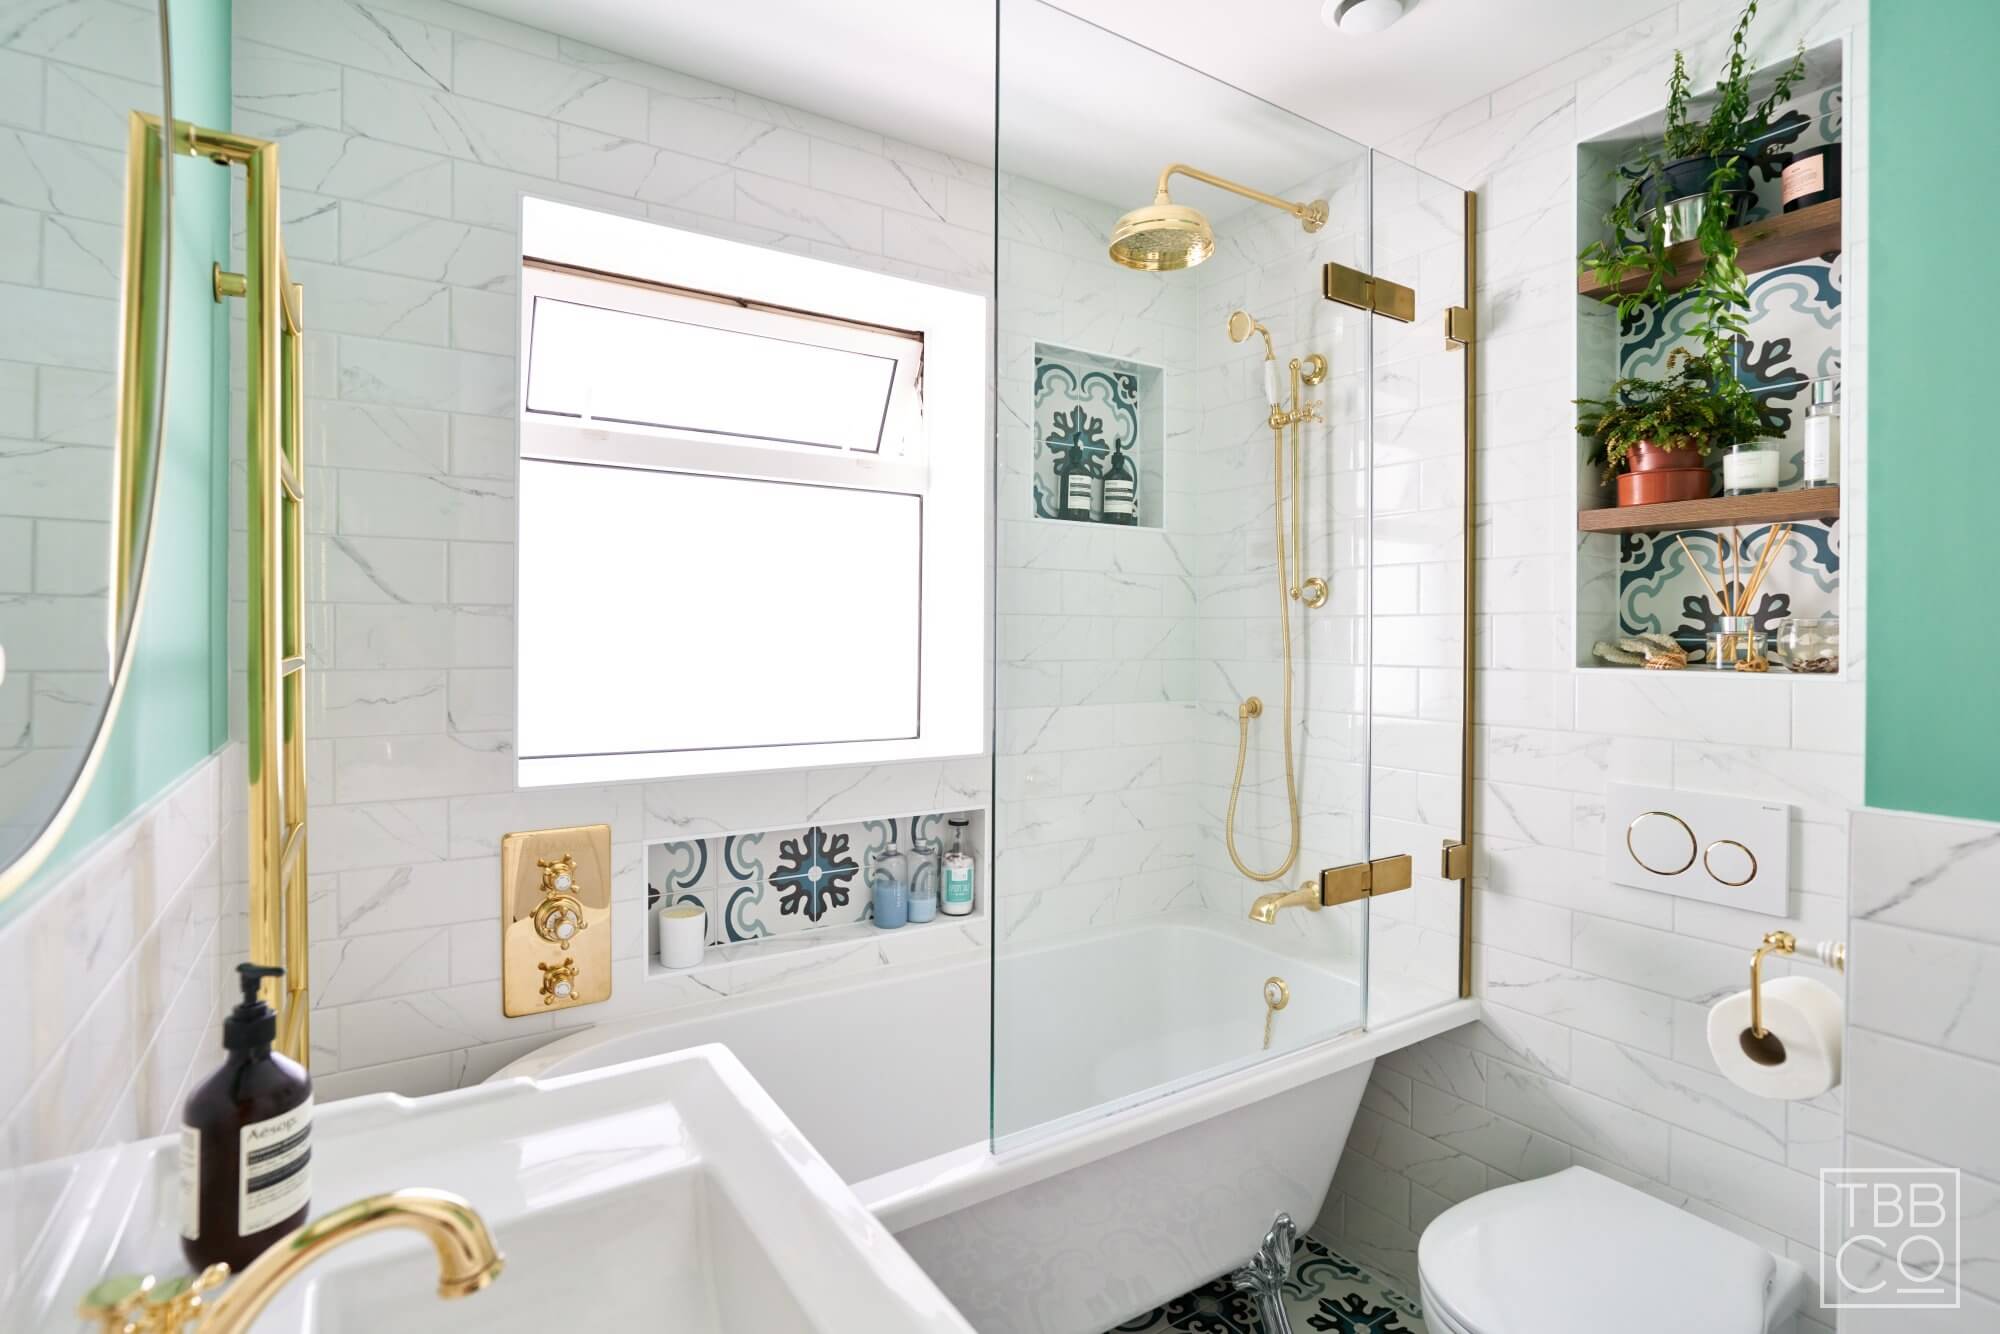 Bath with Patterned Tiles, Gold Shower Valve and Bath Screen